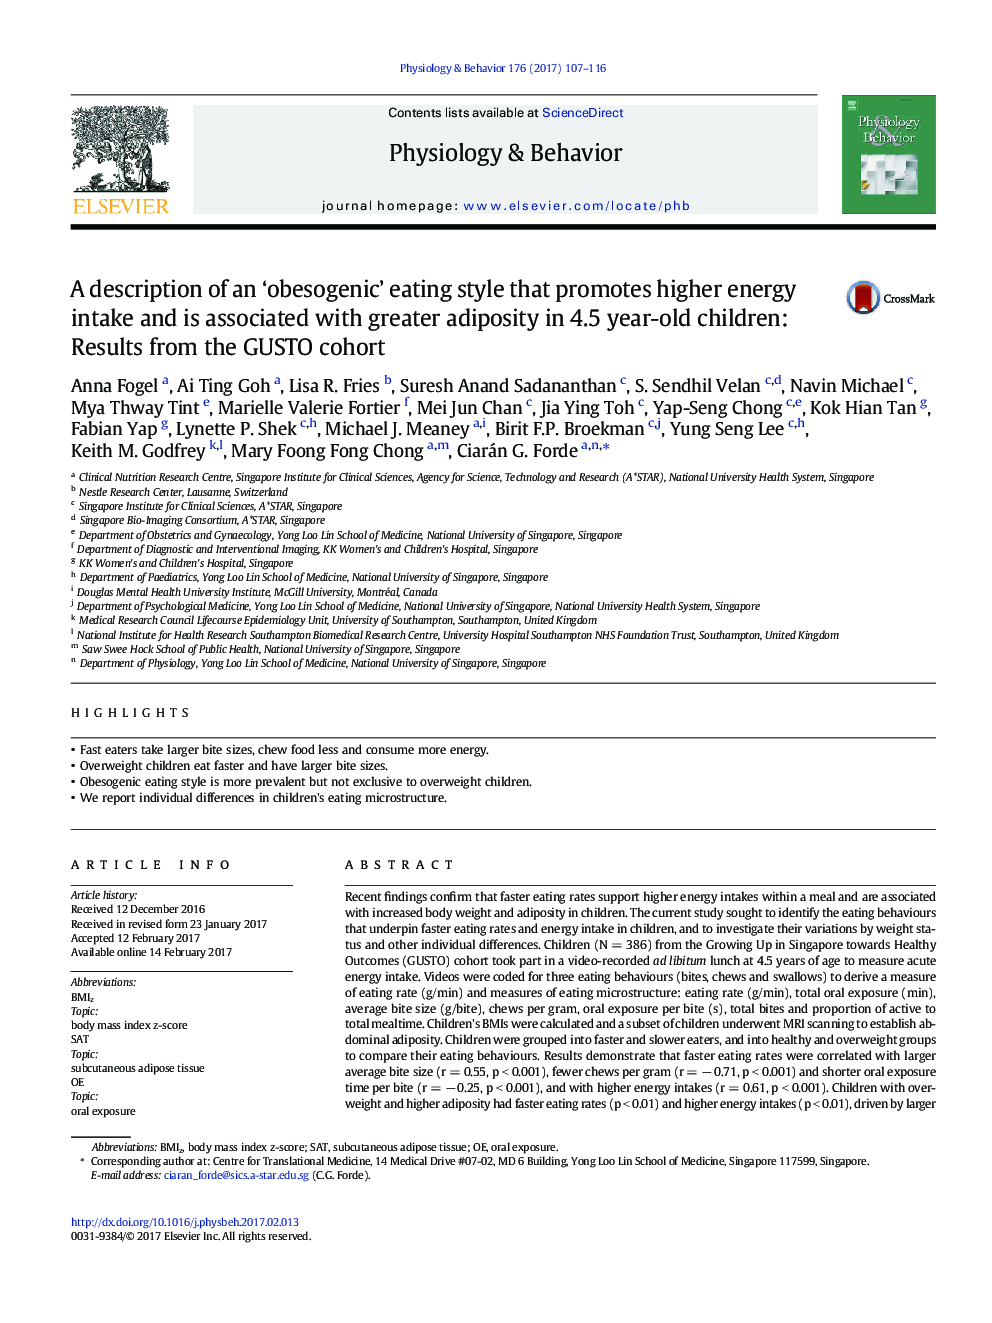 A description of an 'obesogenic' eating style that promotes higher energy intake and is associated with greater adiposity in 4.5 year-old children: Results from the GUSTO cohort